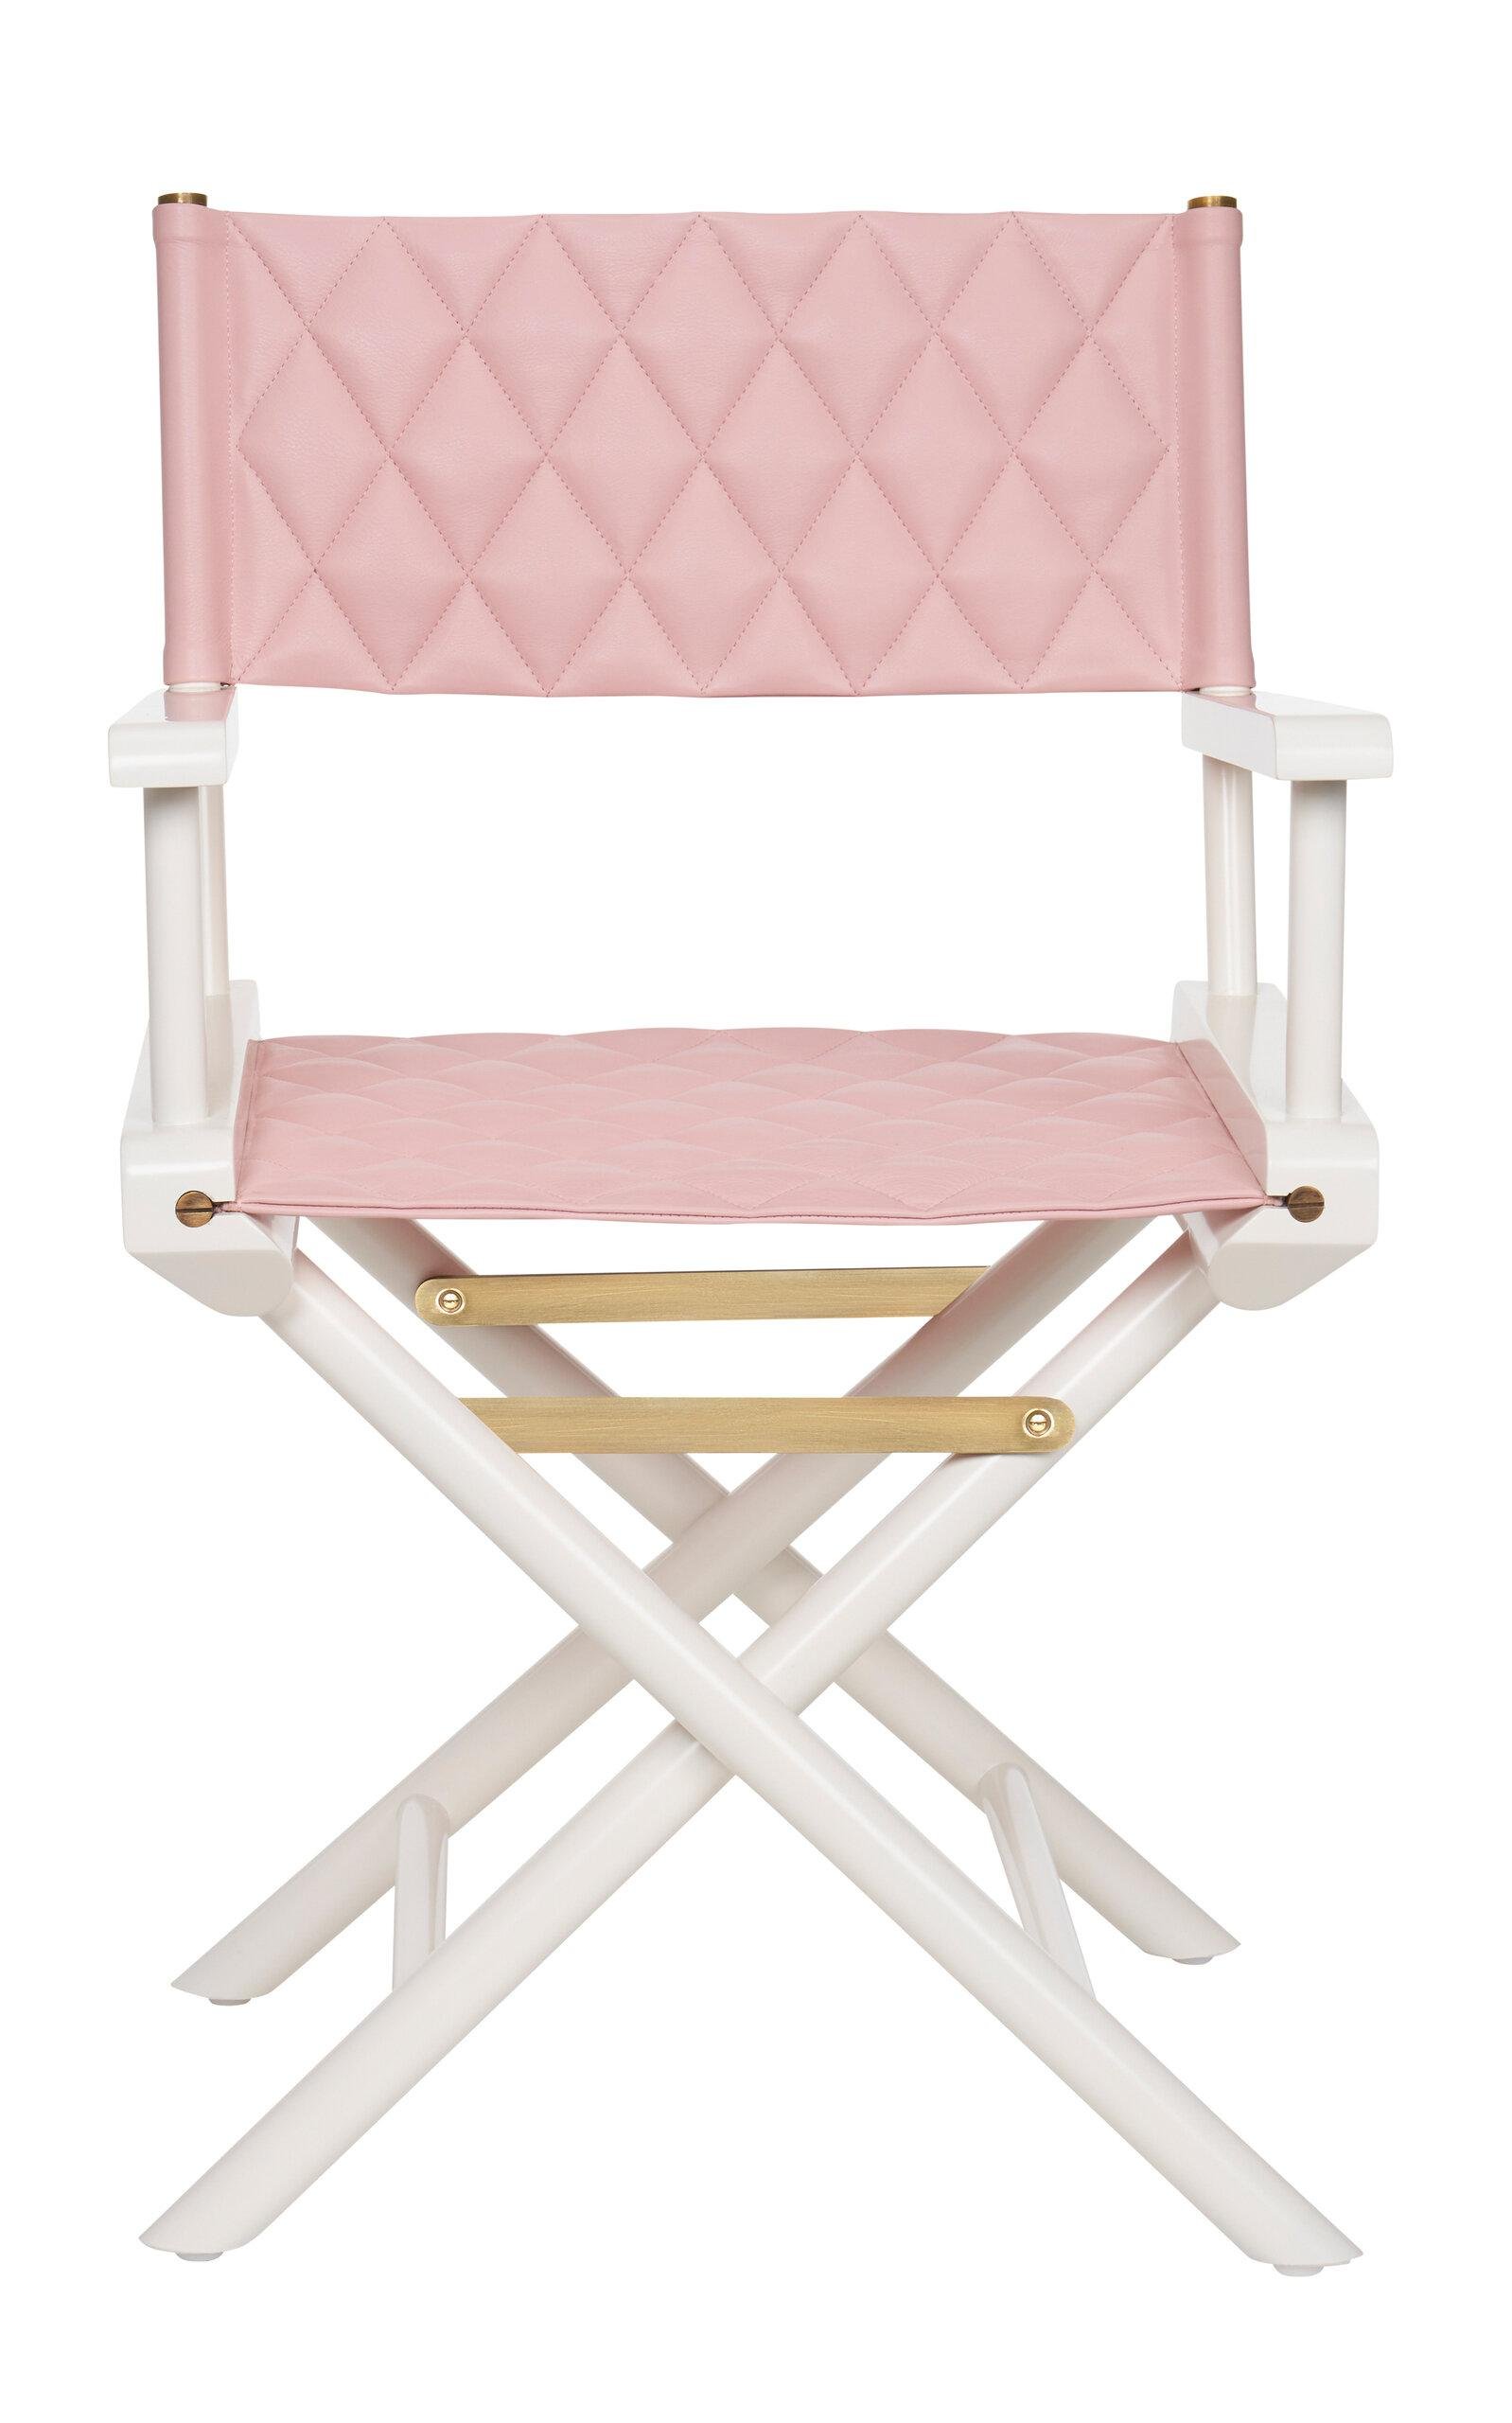 Stage 117 - The YUL: A Low Director's Chair - Pink - Moda Operandi by STAGE 117